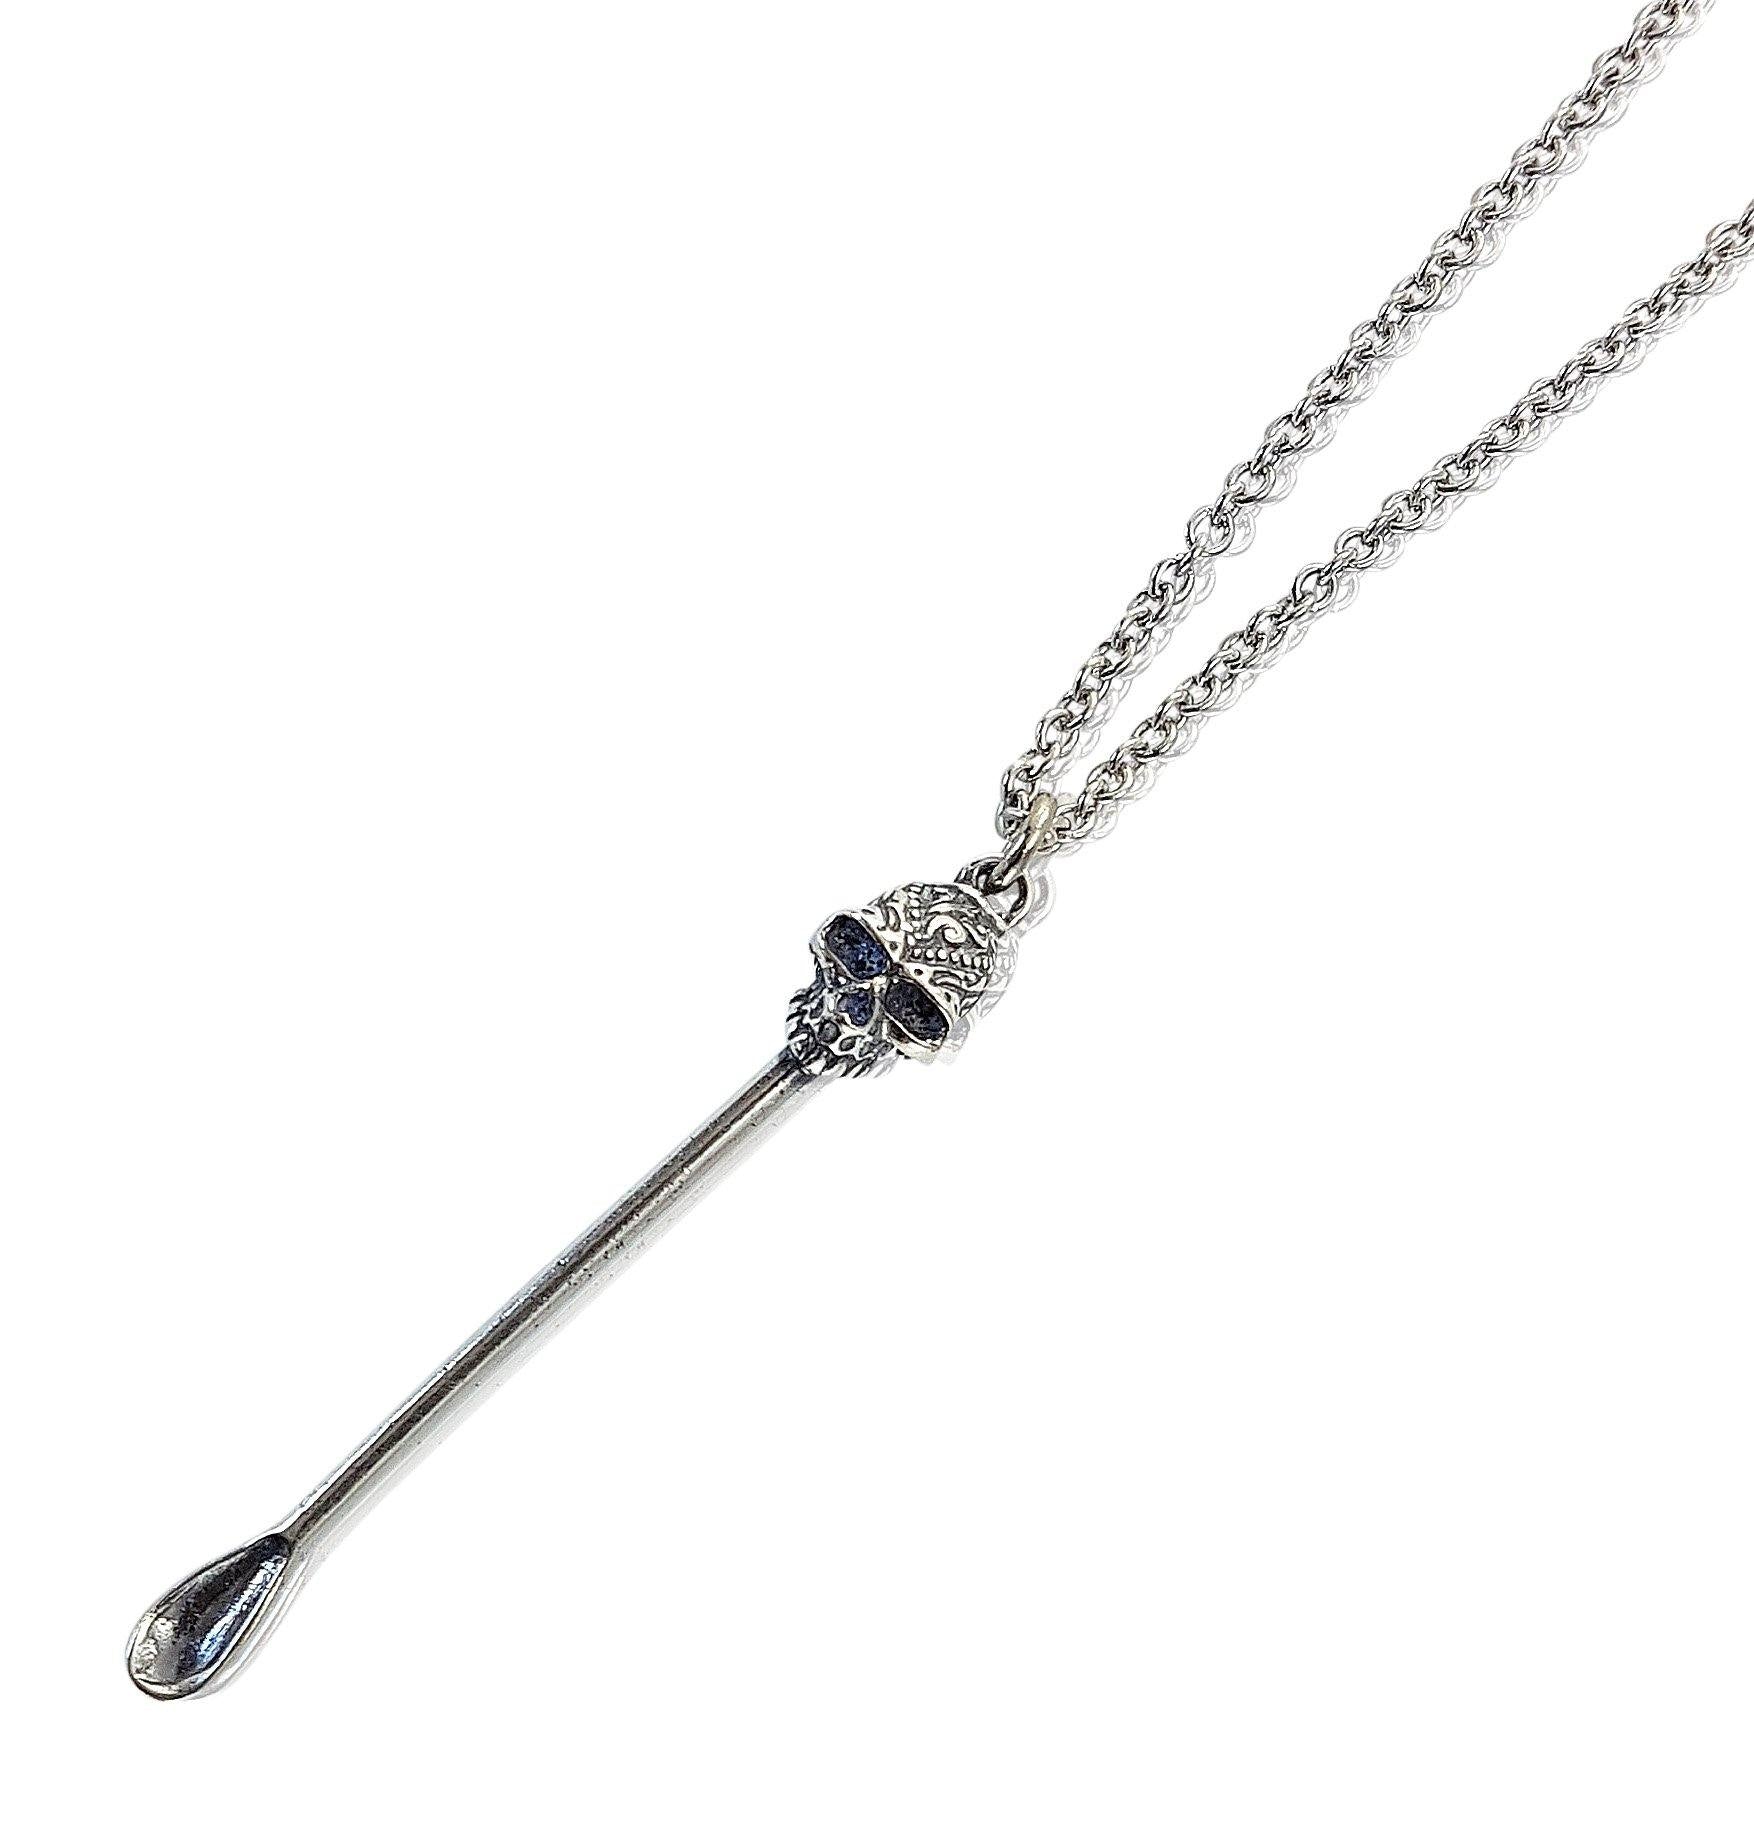 Snuff Necklace with Spoon Pendant + Spoon Detachable from Chain